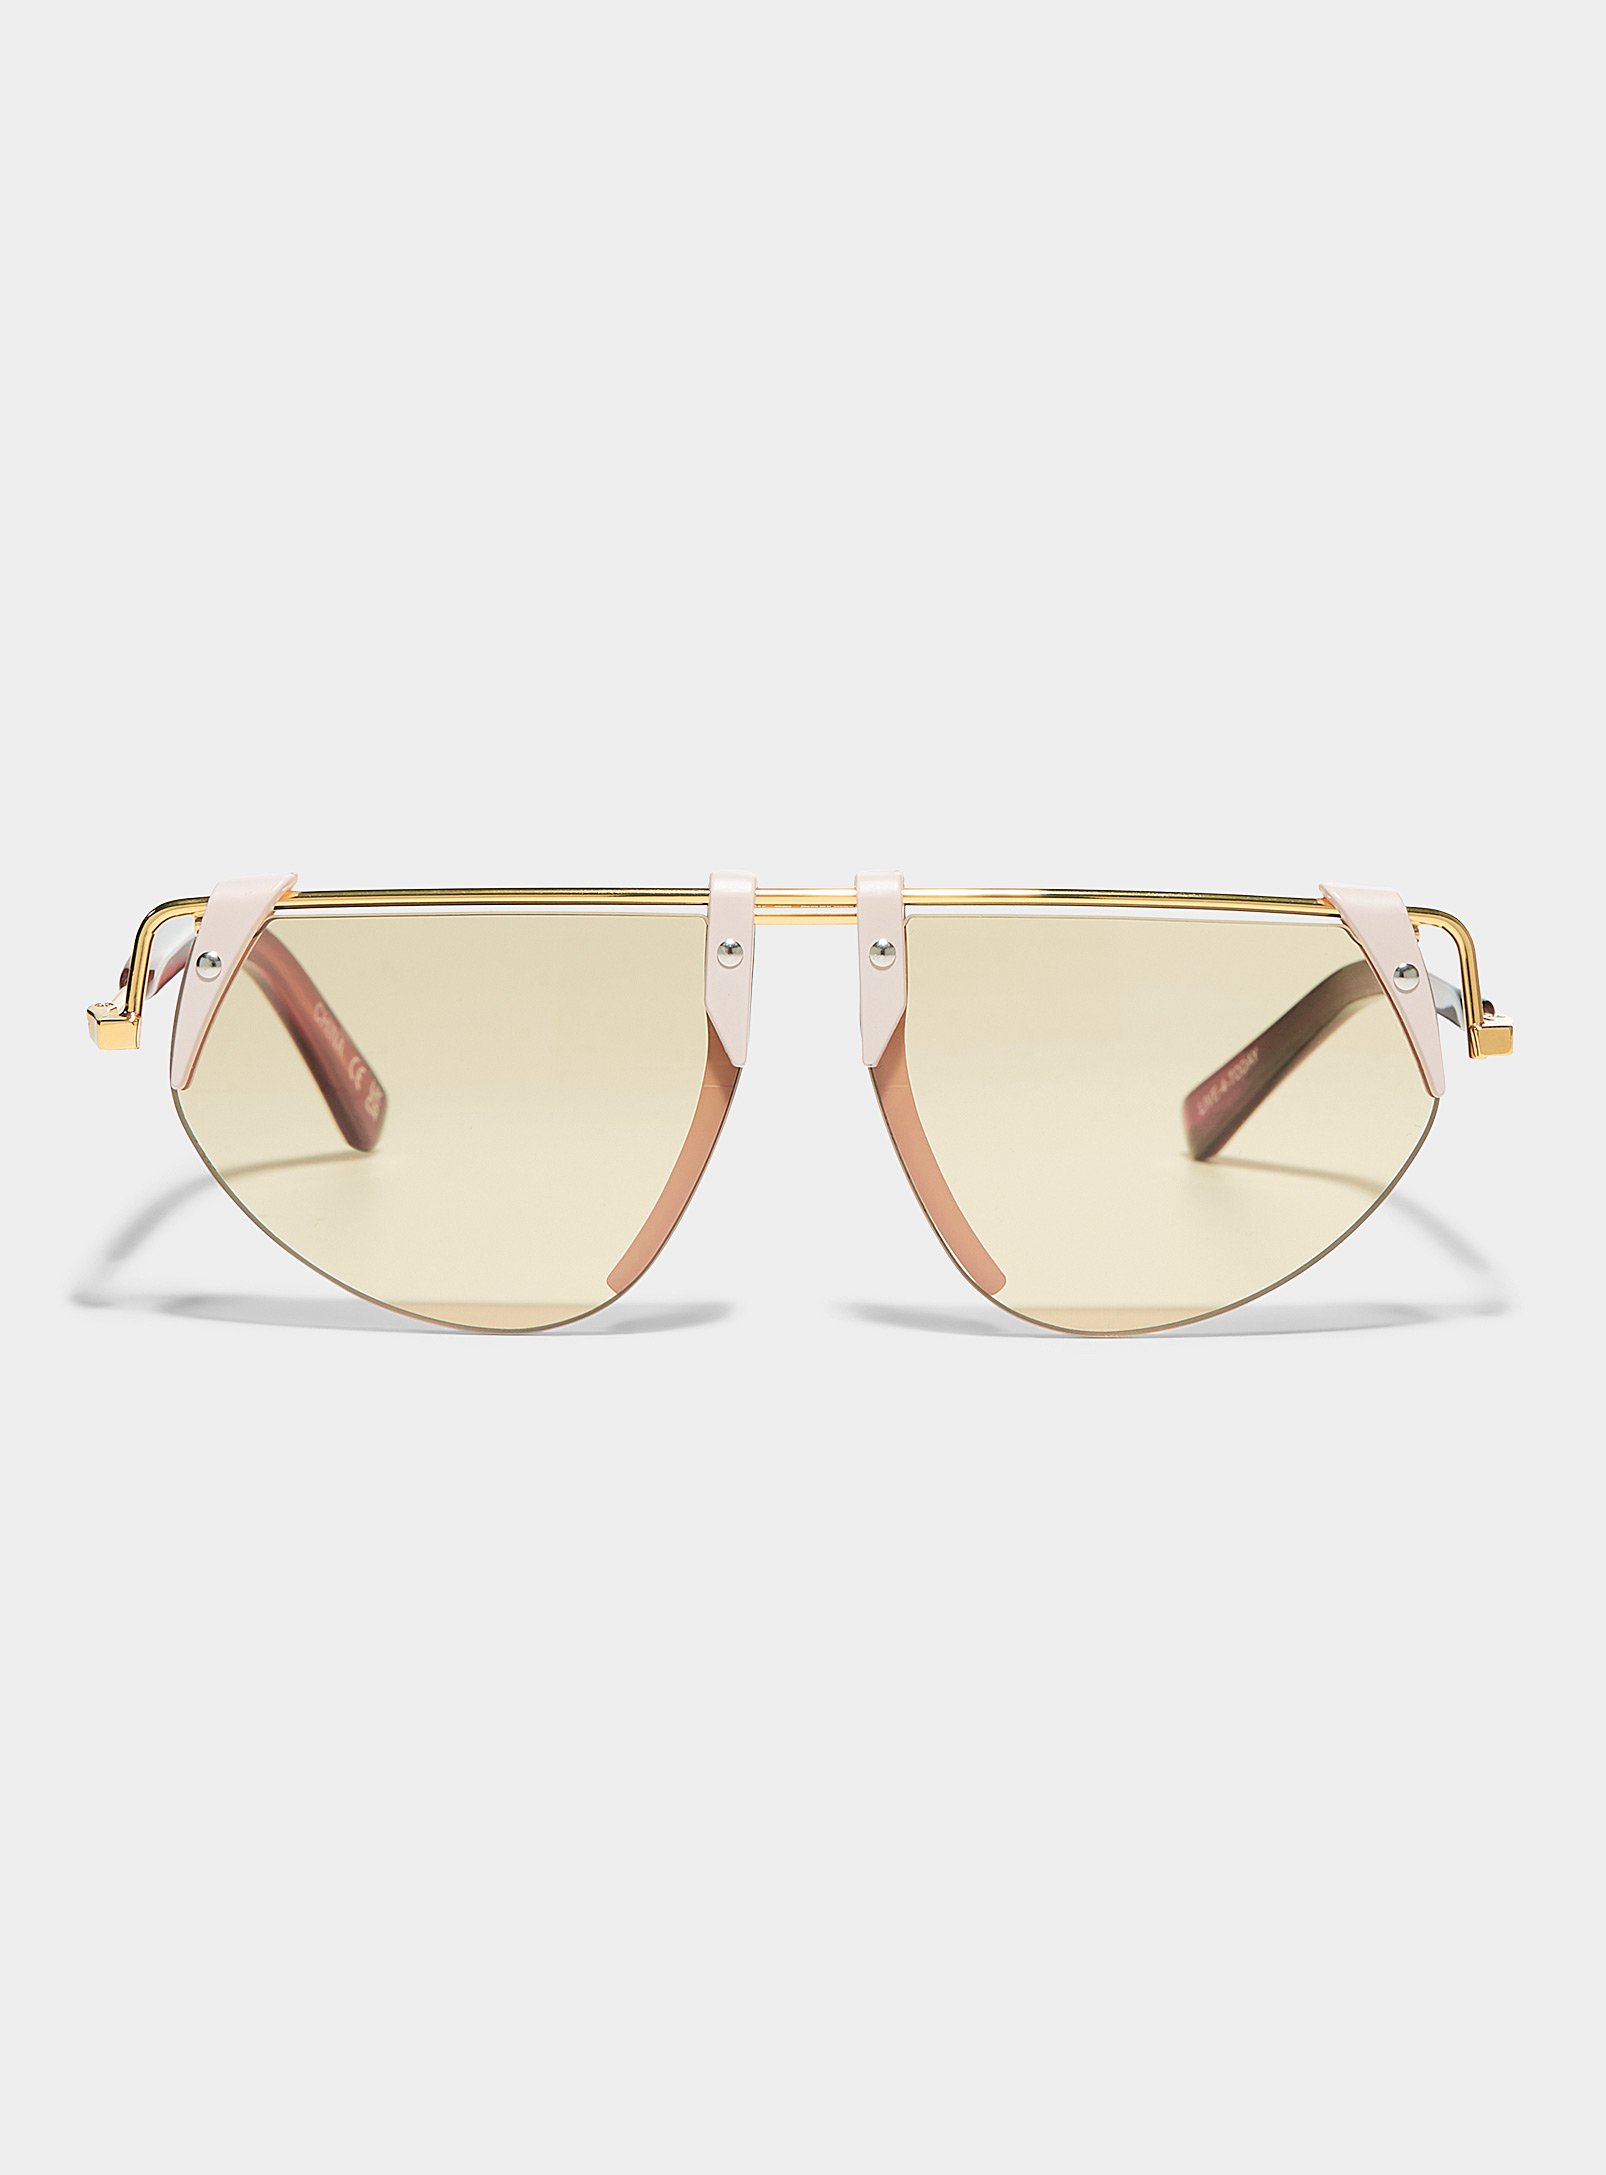 Spitfire Live For Today Edgy Aviator Sunglasses In Gold